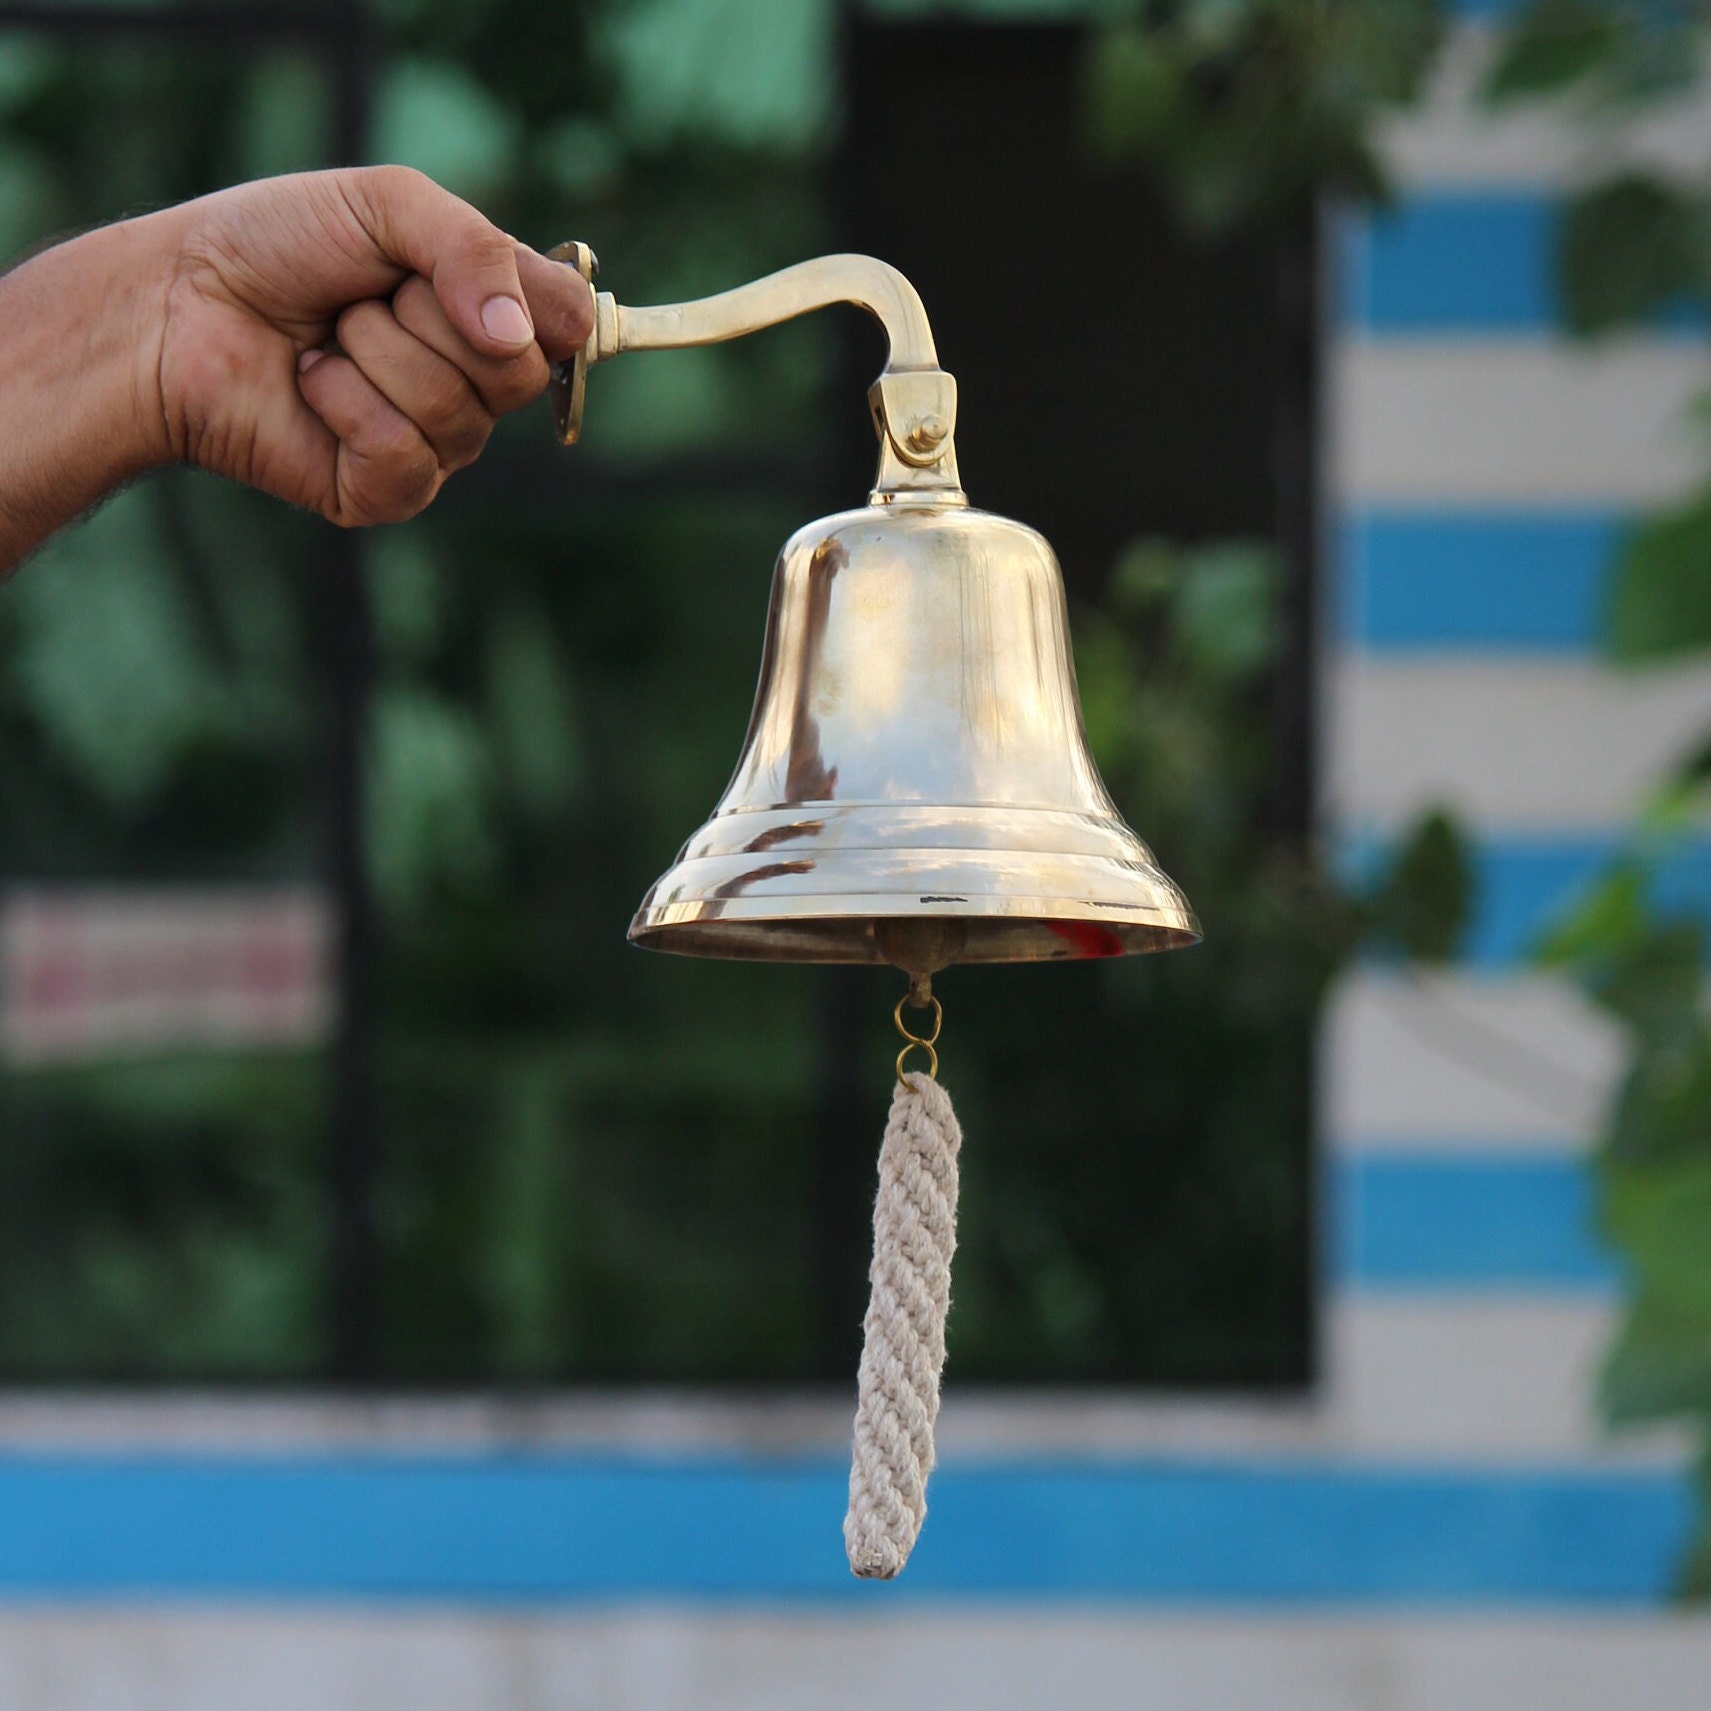 Brass Hanging Bell With Chain Temple Hanging Bell Engraved